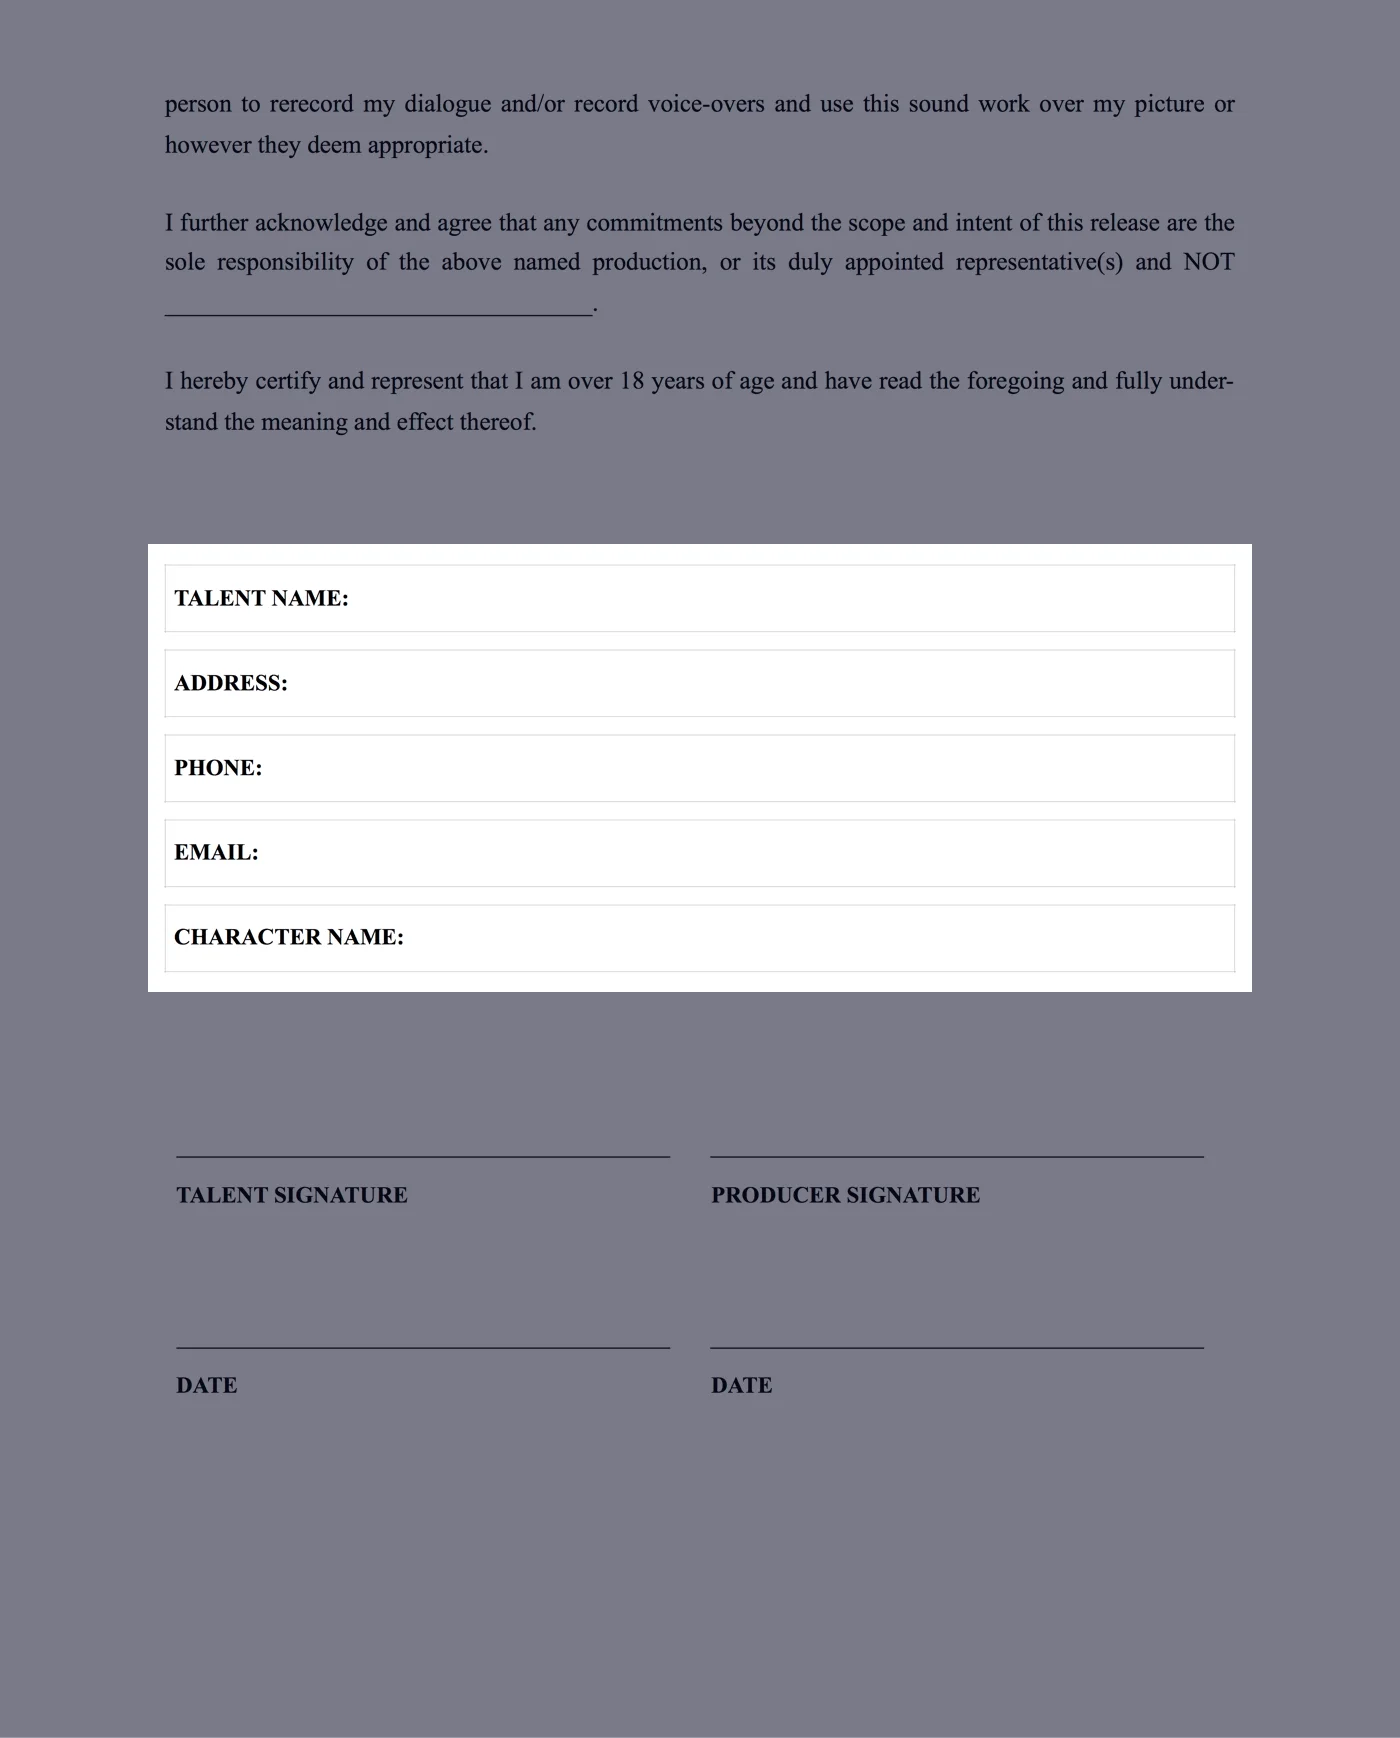 Film Actor Release Form Template - Fill in Variable Fields - StudioBinder